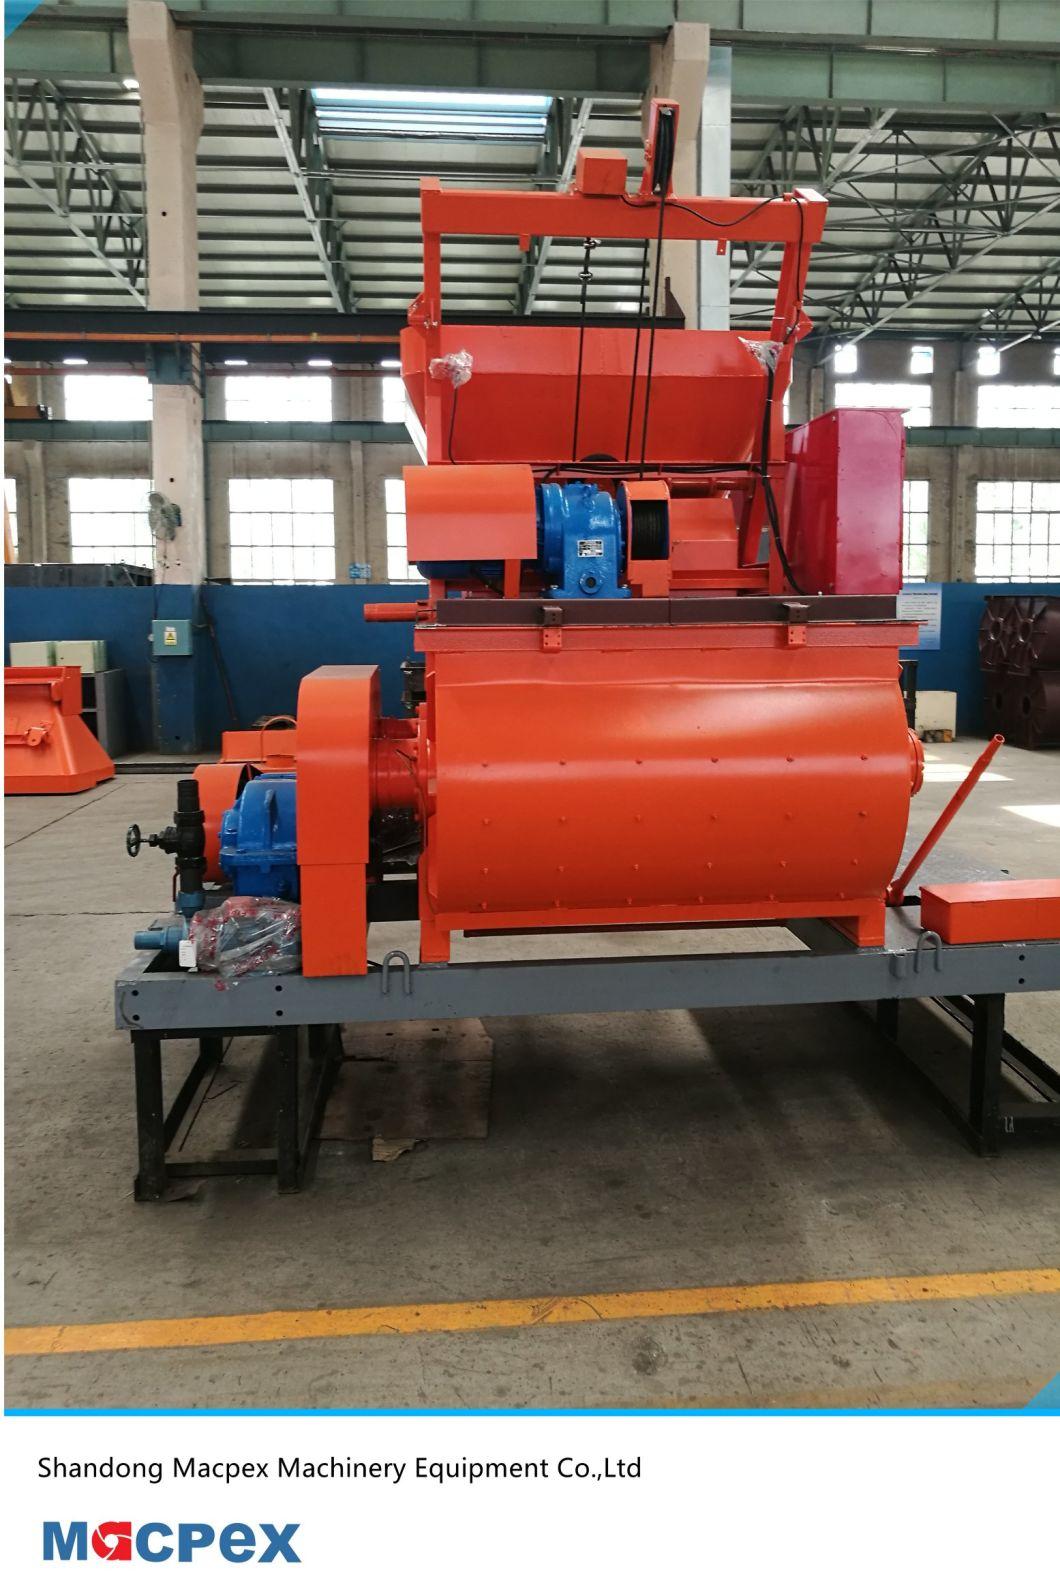 Skip Hopper Type Horizontal Cement Mixer From China Hot Sale